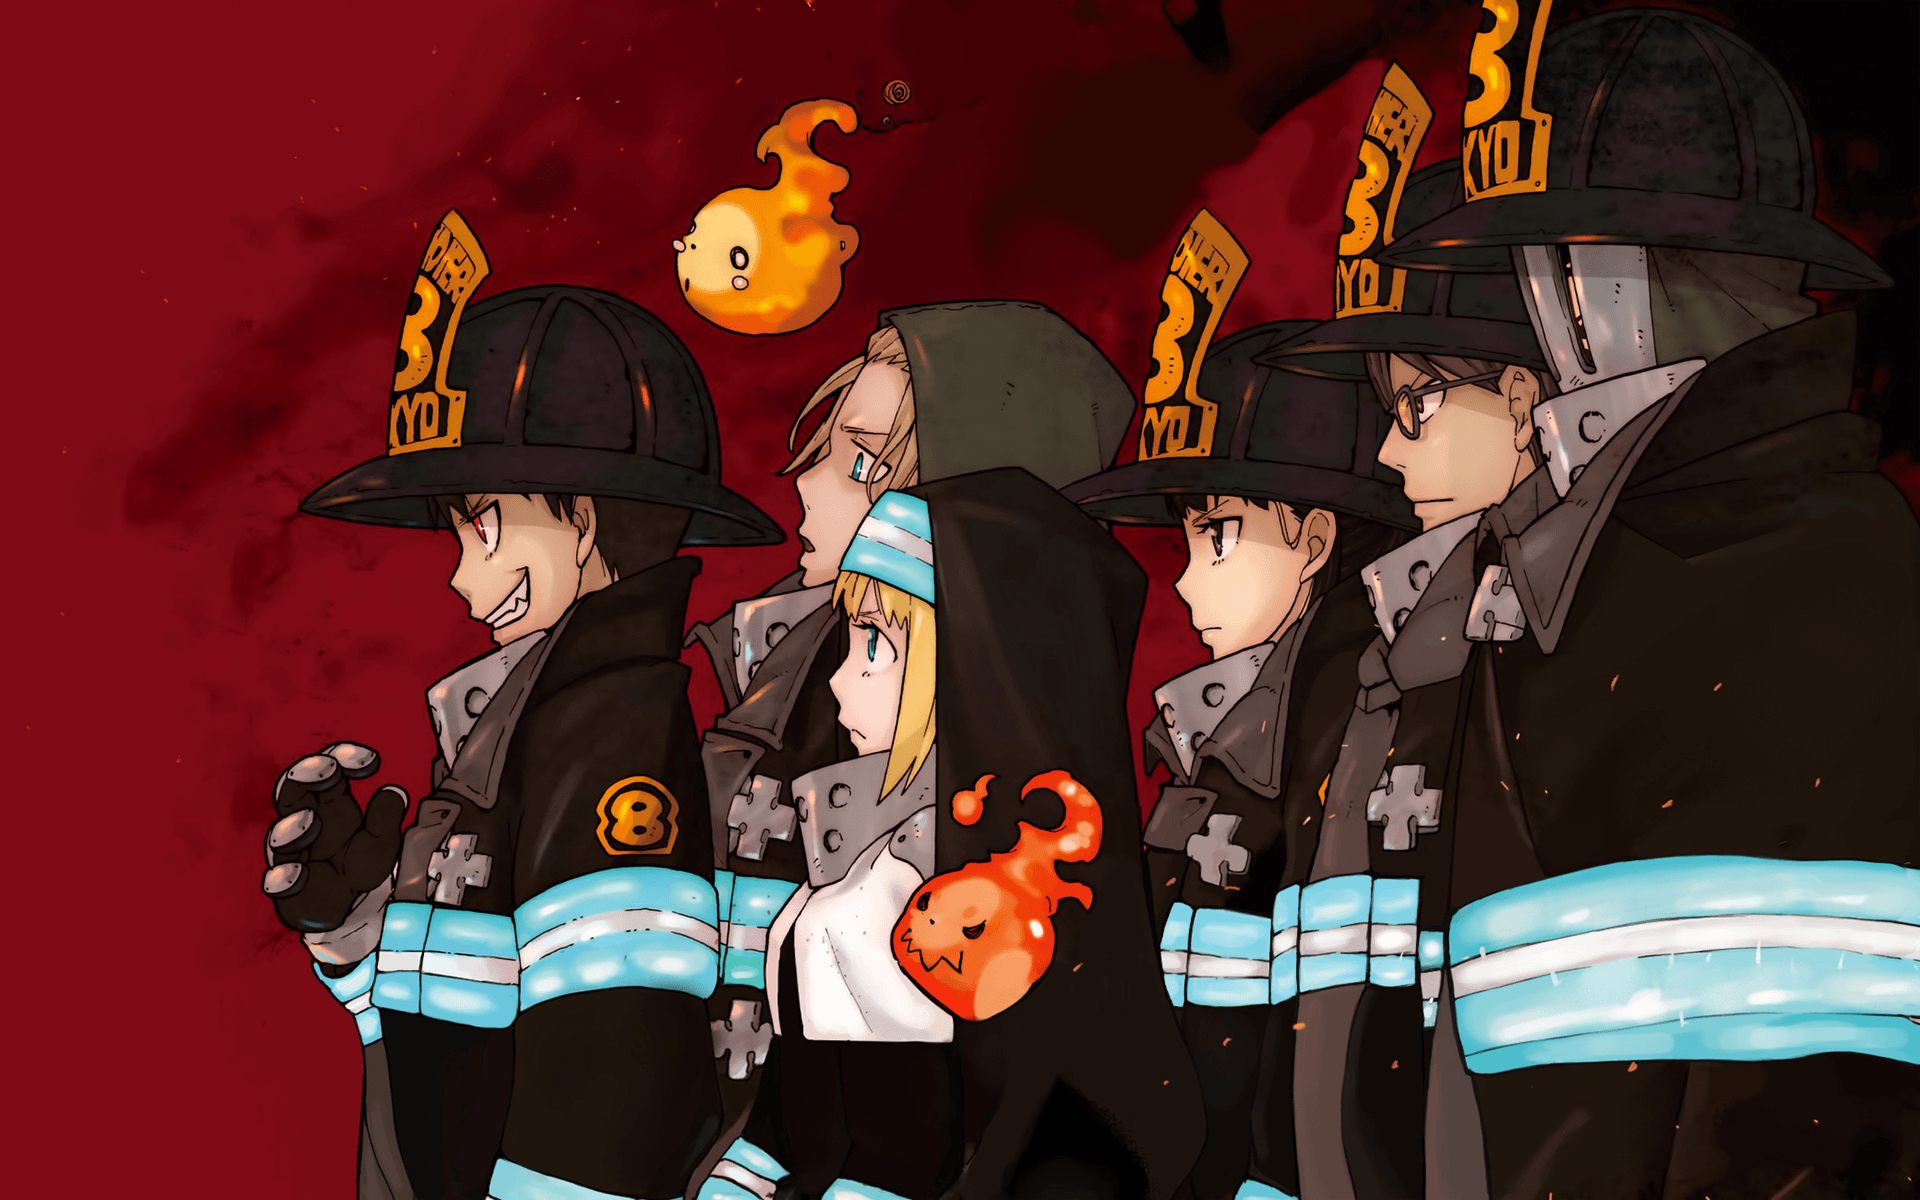 Fire Force Wallpaper Free Fire Force Background